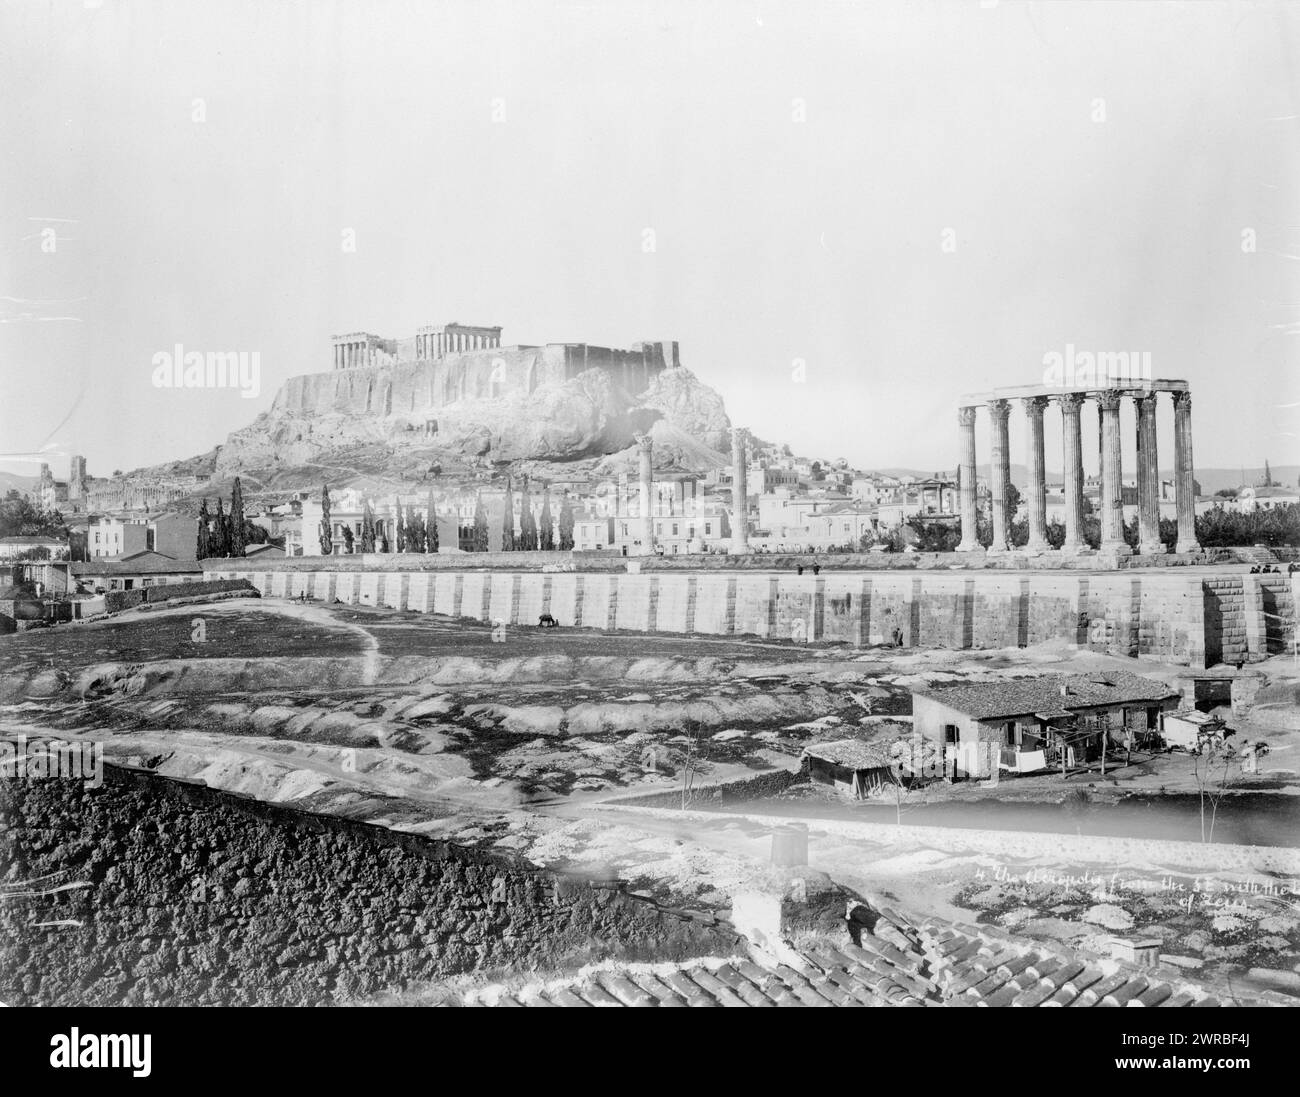 Greece - Athens - The Parthenon - far view, from southeast, Carpenter, Frank G. (Frank George), 1855-1924, collector, ca. 1925, Parthenon (Athens, Greece), Photographic prints, 1920-1930., Photographic prints, 1920-1930, 1 photographic print Stock Photo